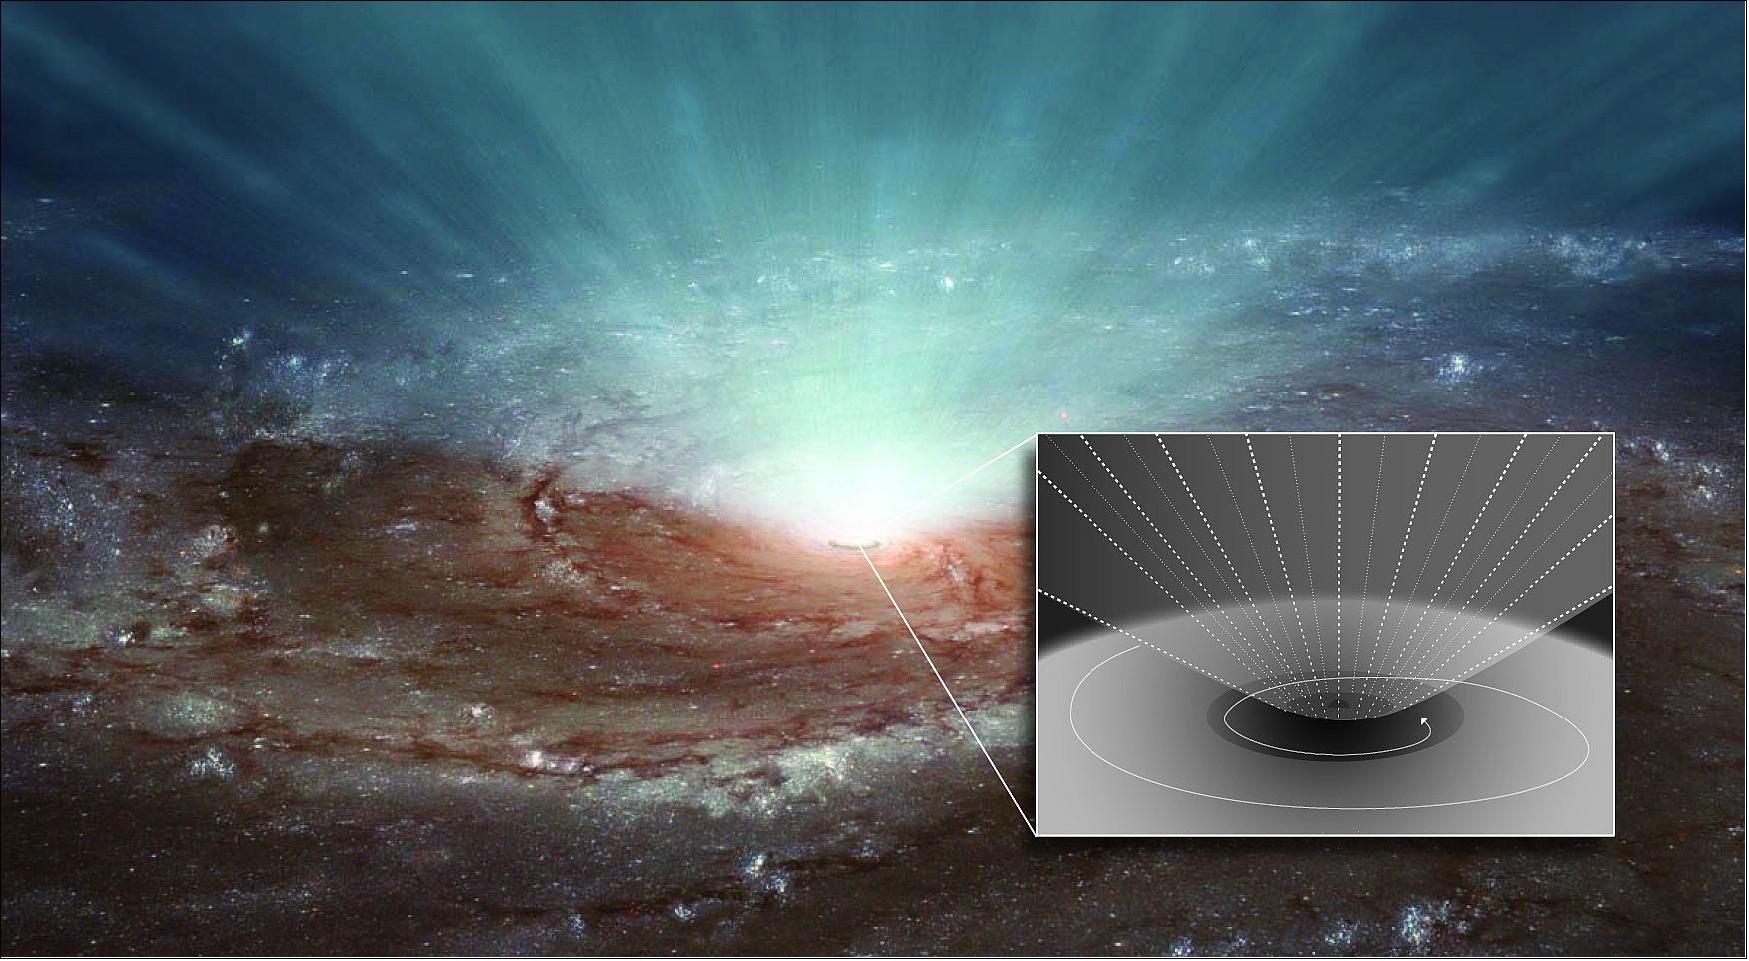 Figure 113: This illustration shows the powerful wind driven by the supermassive black hole at the center of a galaxy. The schematic figure in the insert depicts the innermost regions of the galaxy where a black hole accretes the surrounding matter (light grey) at a very high pace via a disc (darker grey). At the same time, part of that matter is cast away through powerful winds (image credit: NASA/JPL, Caltech)